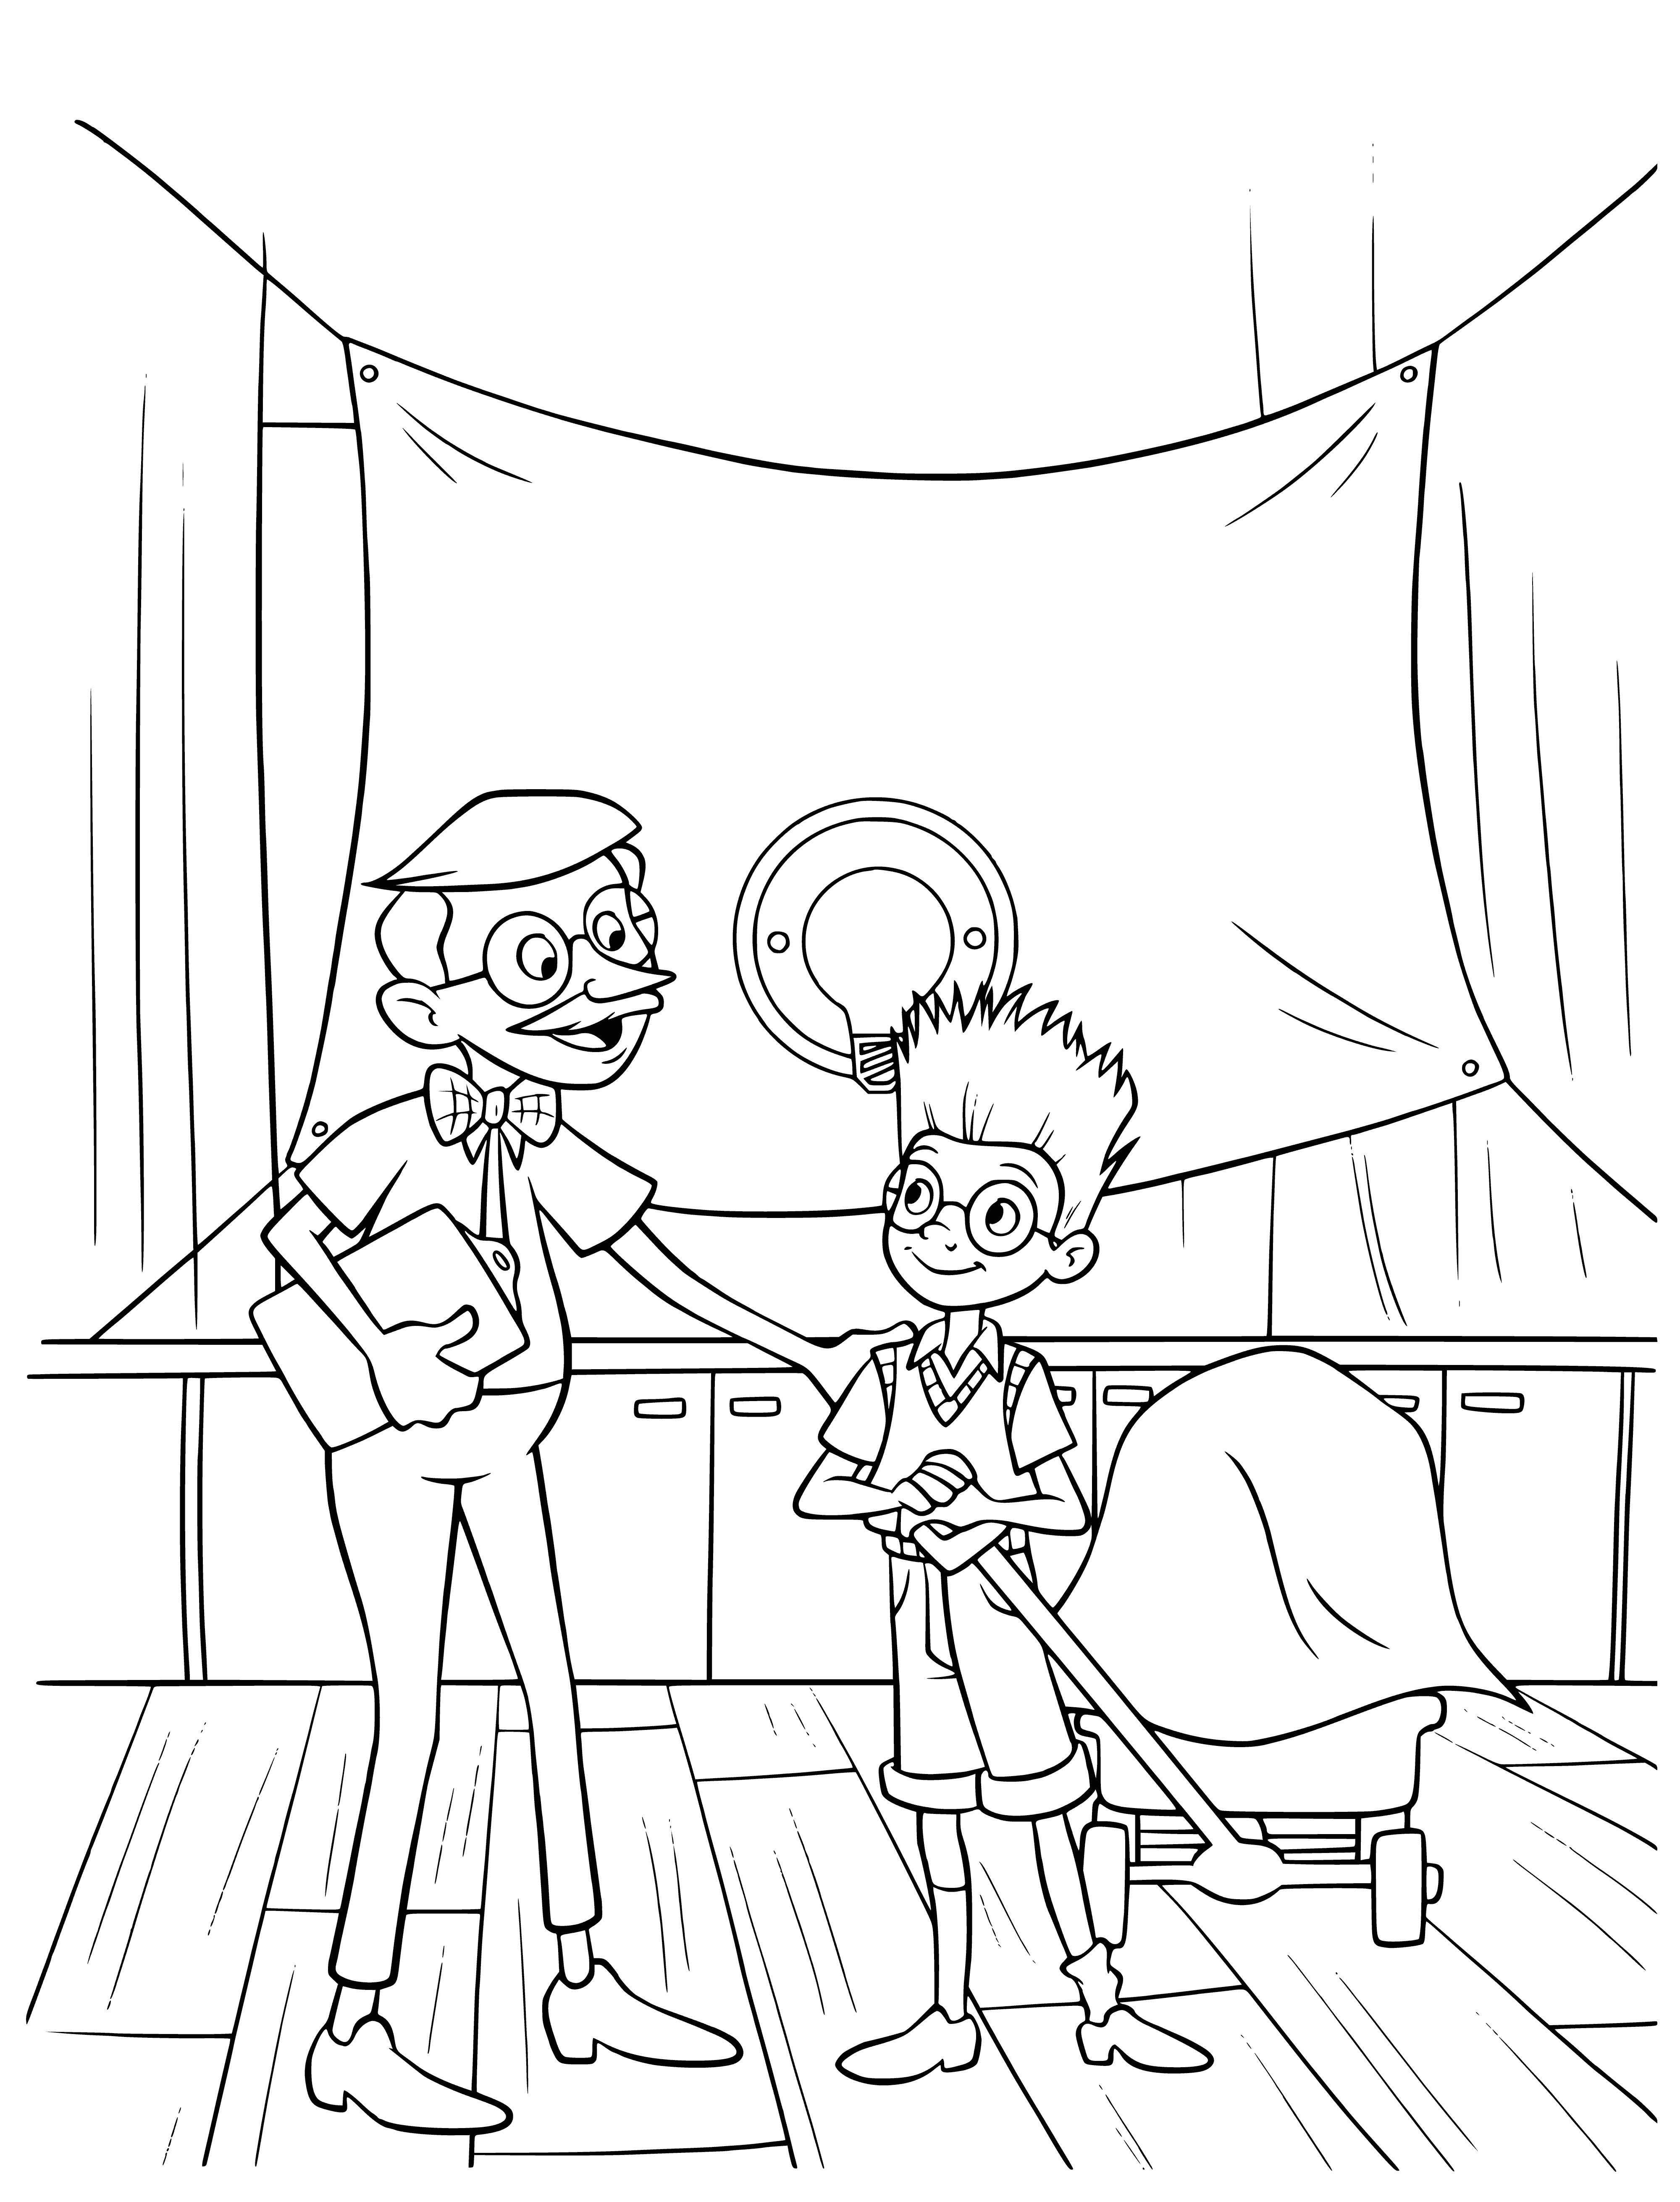 coloring page: Coloring page takes you to an exhibition of inventions, people interacting and learning about the different machines and contraptions. Signs provide info about each one. #machines #contraptions